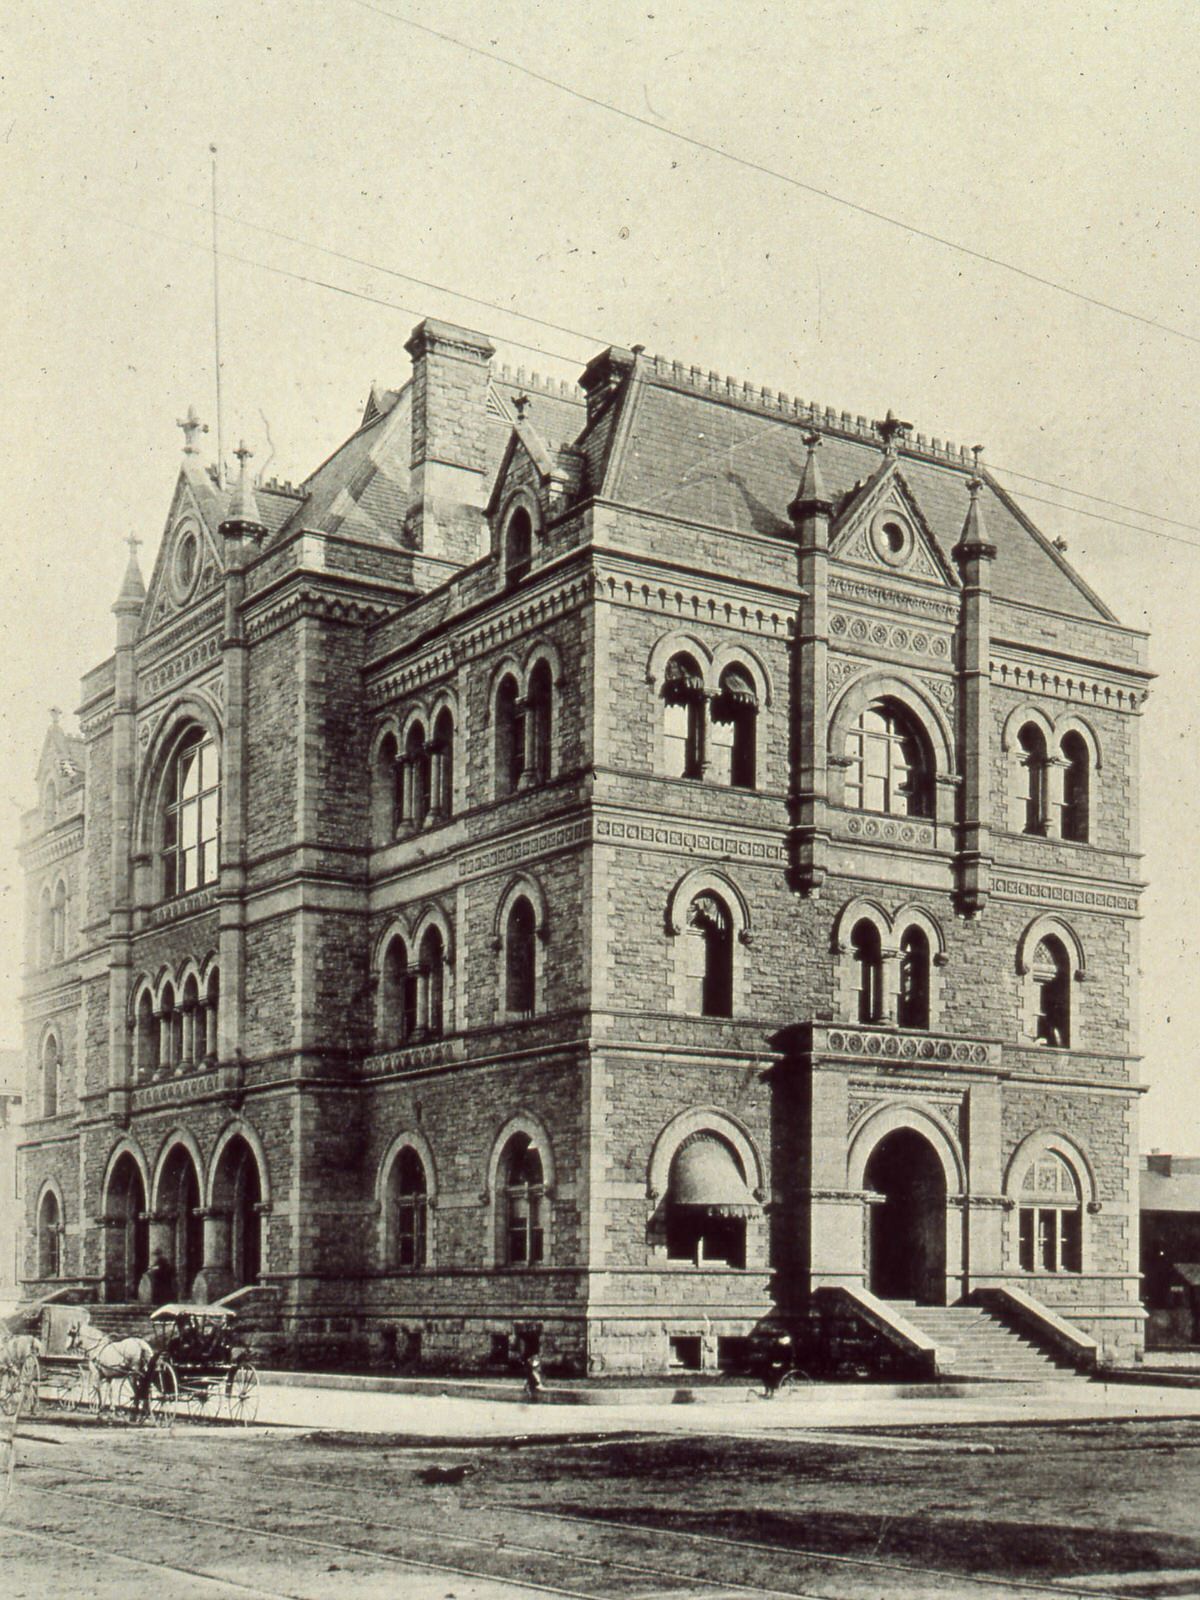 United States Post Office and Government Building, 1889